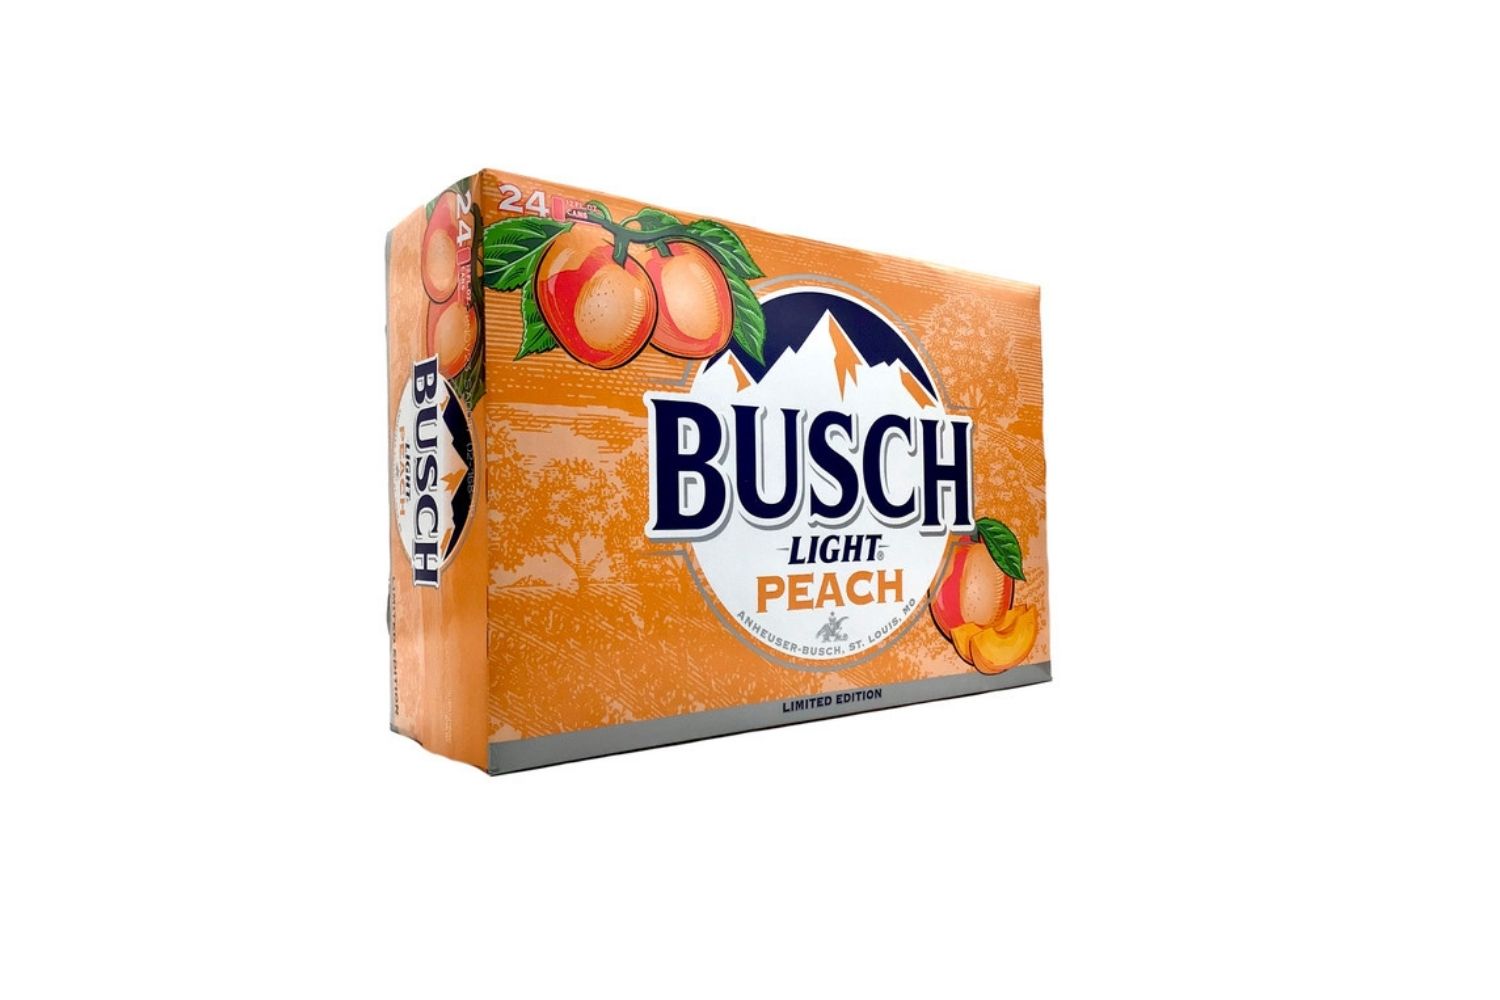 8-enigmatic-facts-about-busch-light-peach